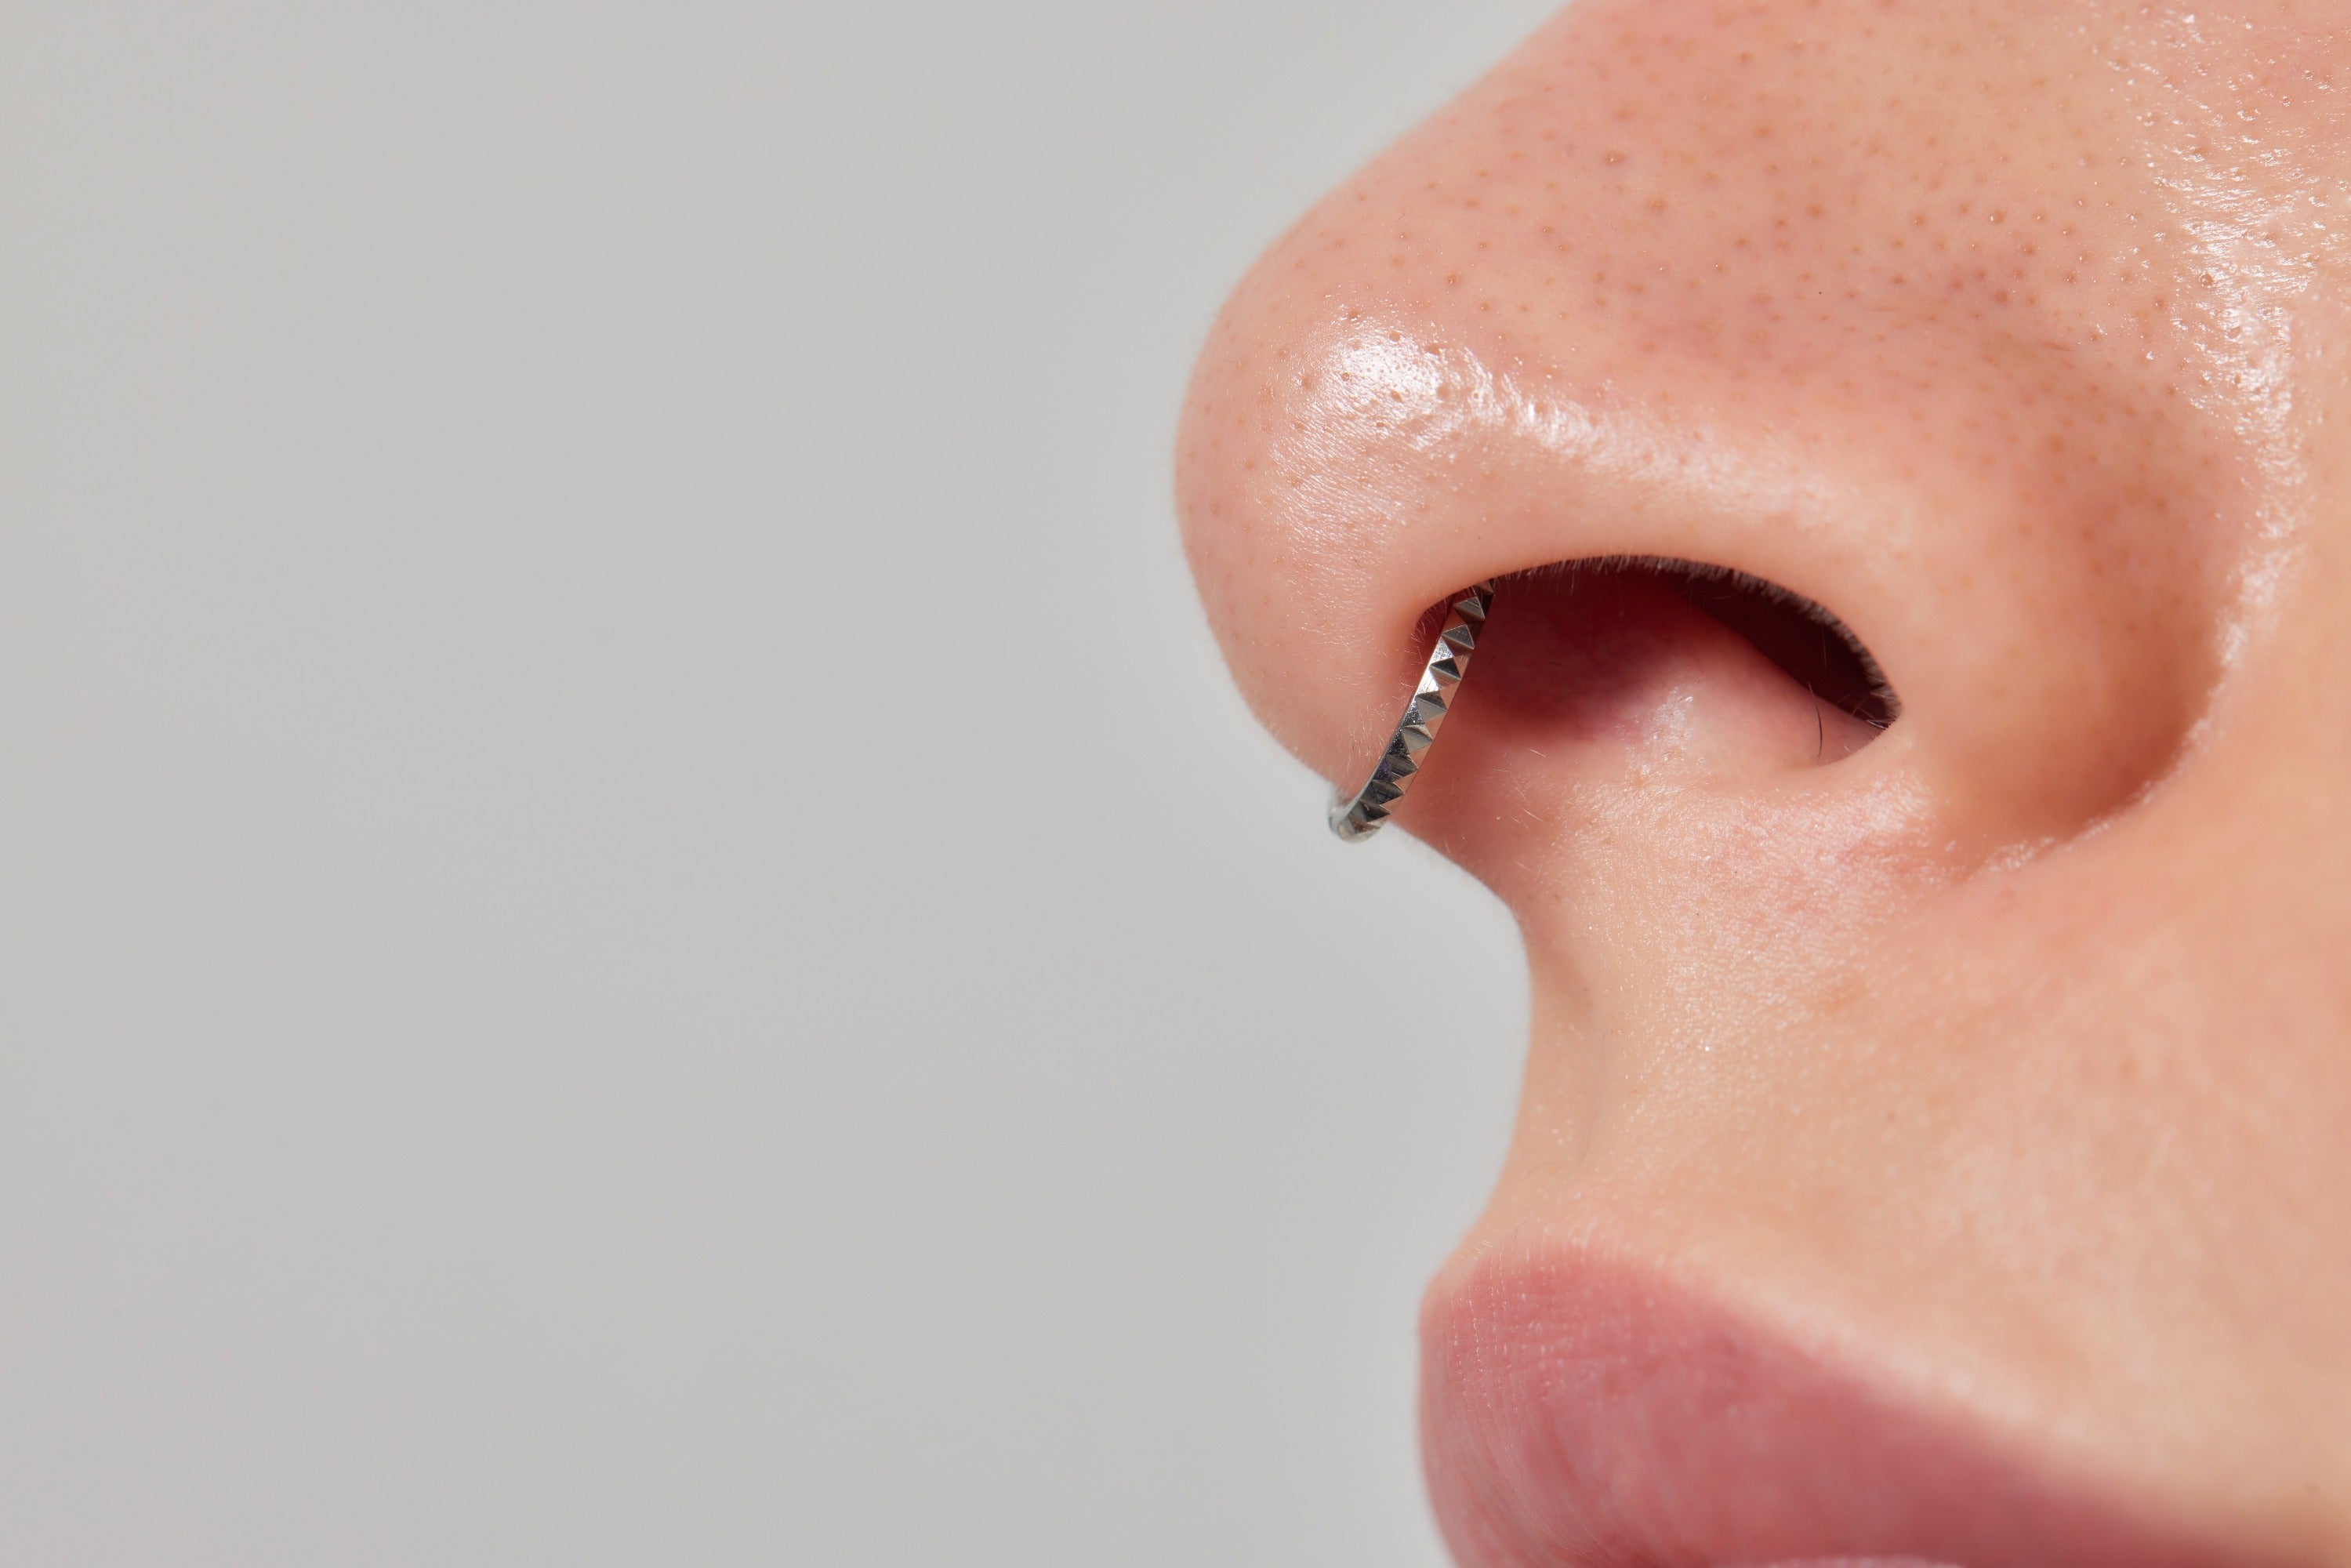 4 Causes of a Nose Piercing Bump